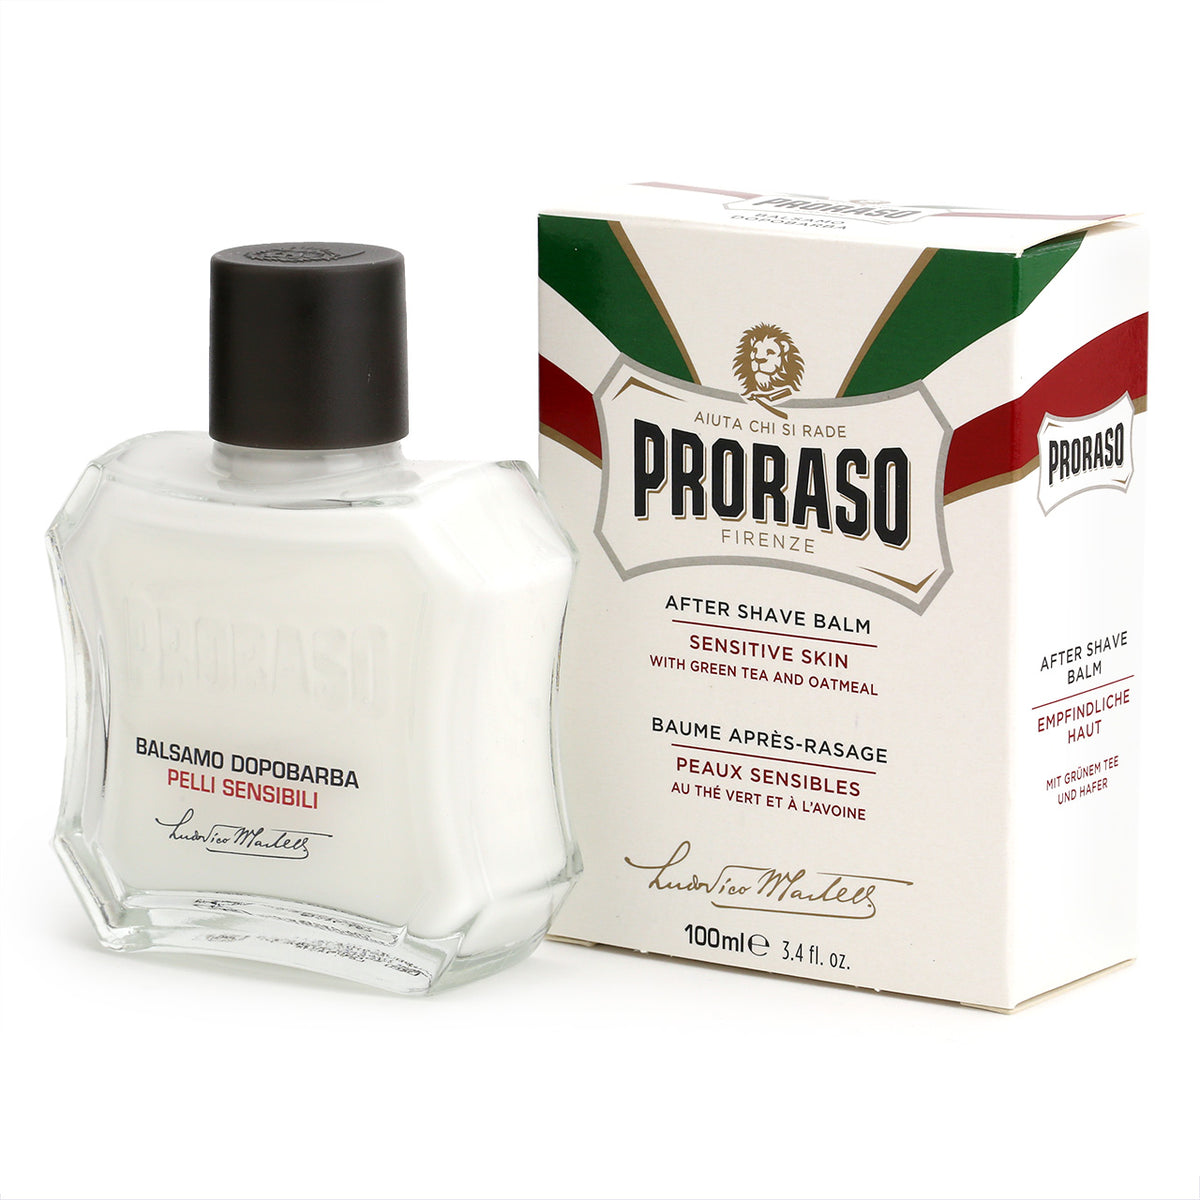 Proraso After Shave Balm with Green Tea &amp; Oatmeal for sensitive skin - retro bottle shape with box